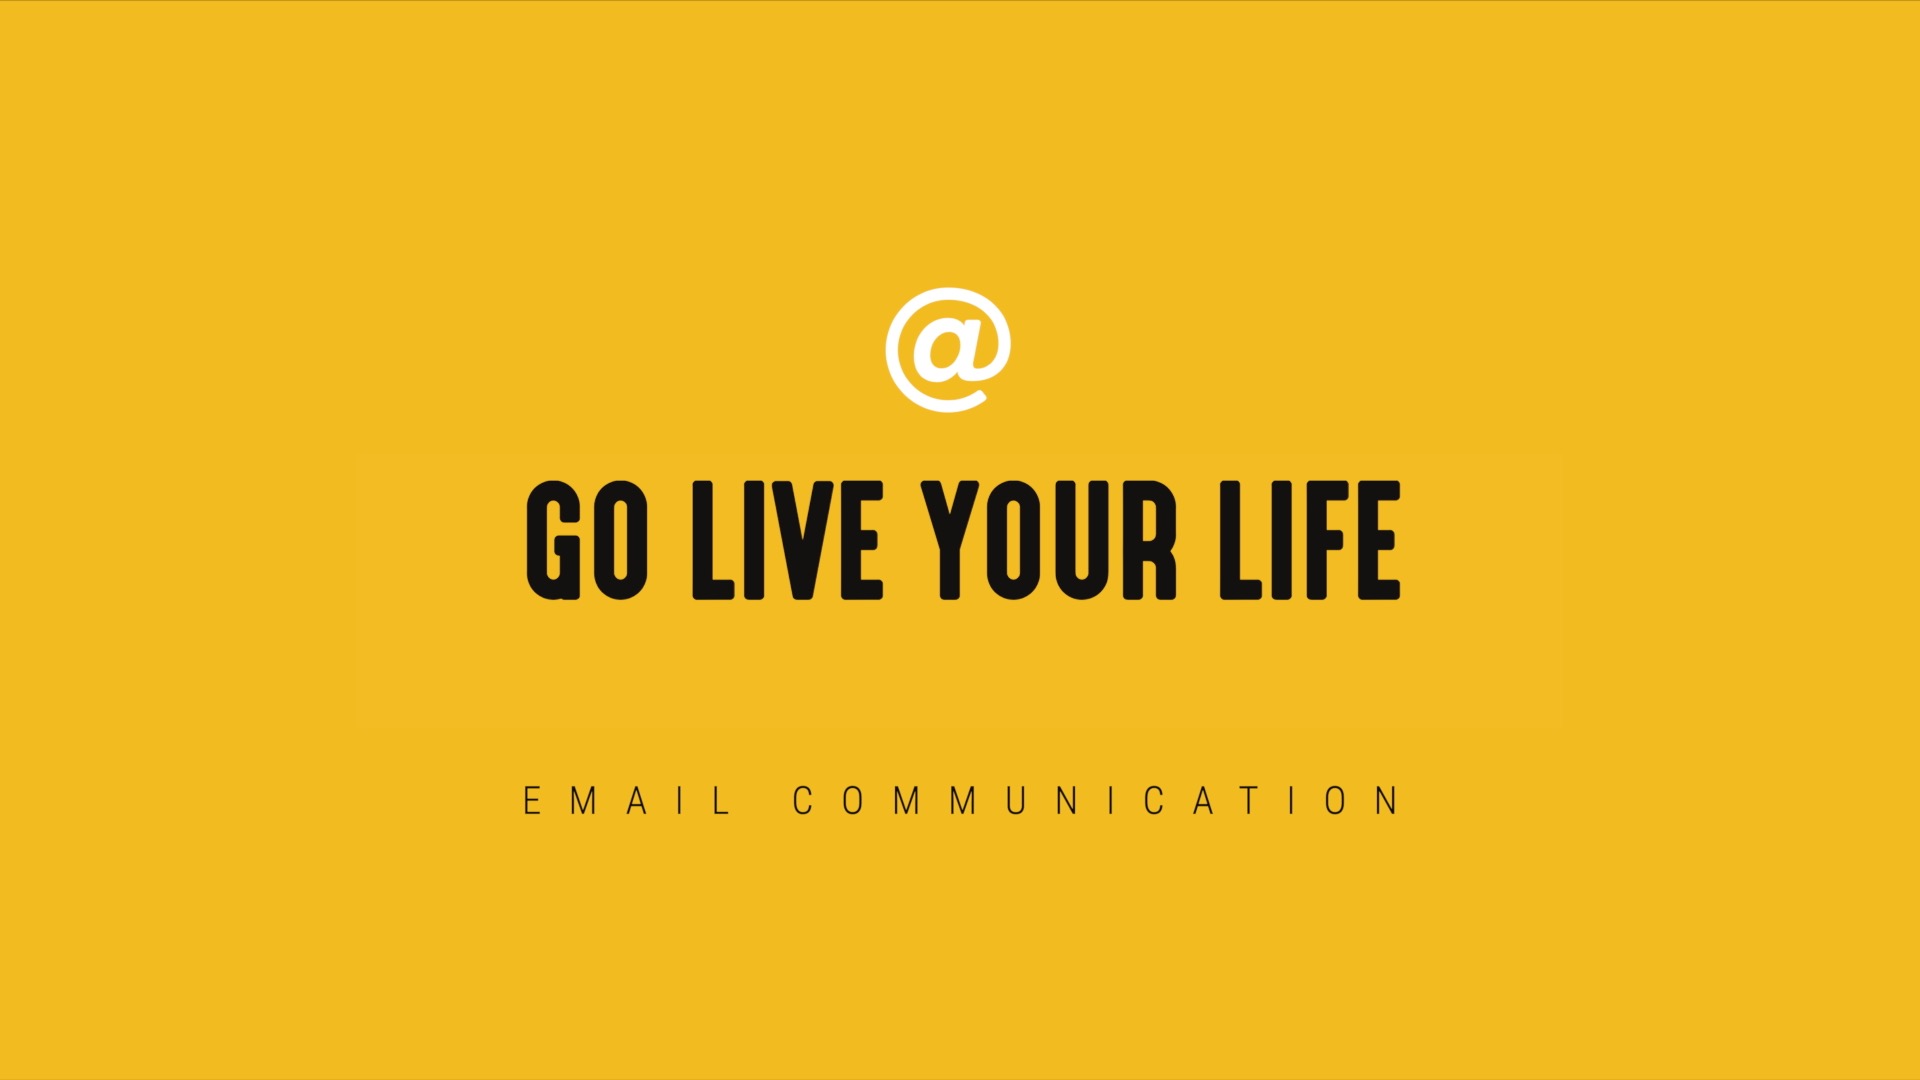 [NEW] Go Live Your Life - Timely Email